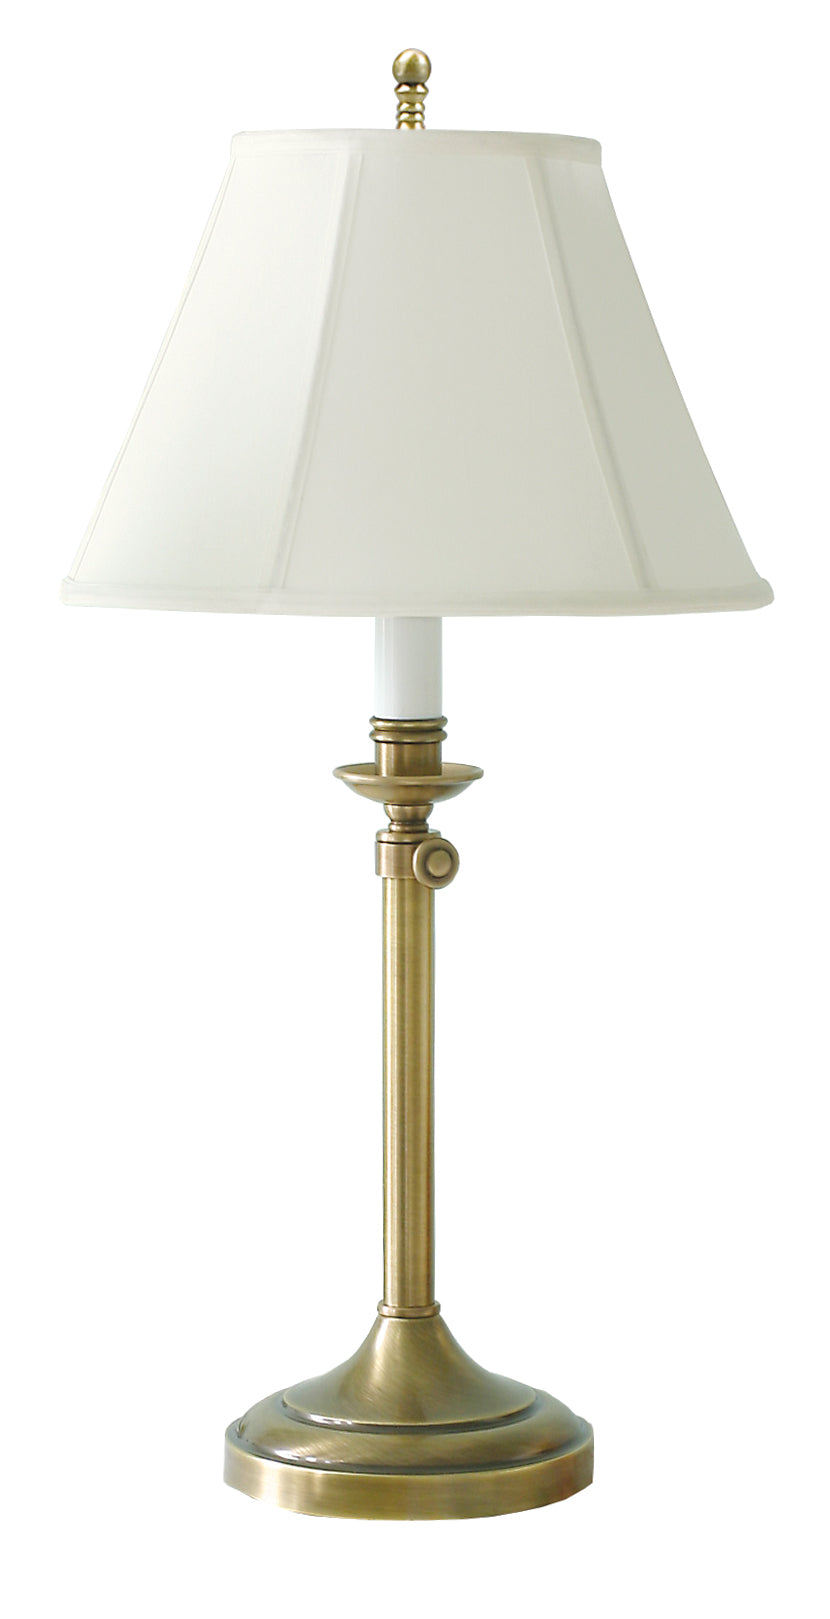 House of Troy Club Adjustable Antique Brass Table Lamp CL250-AB